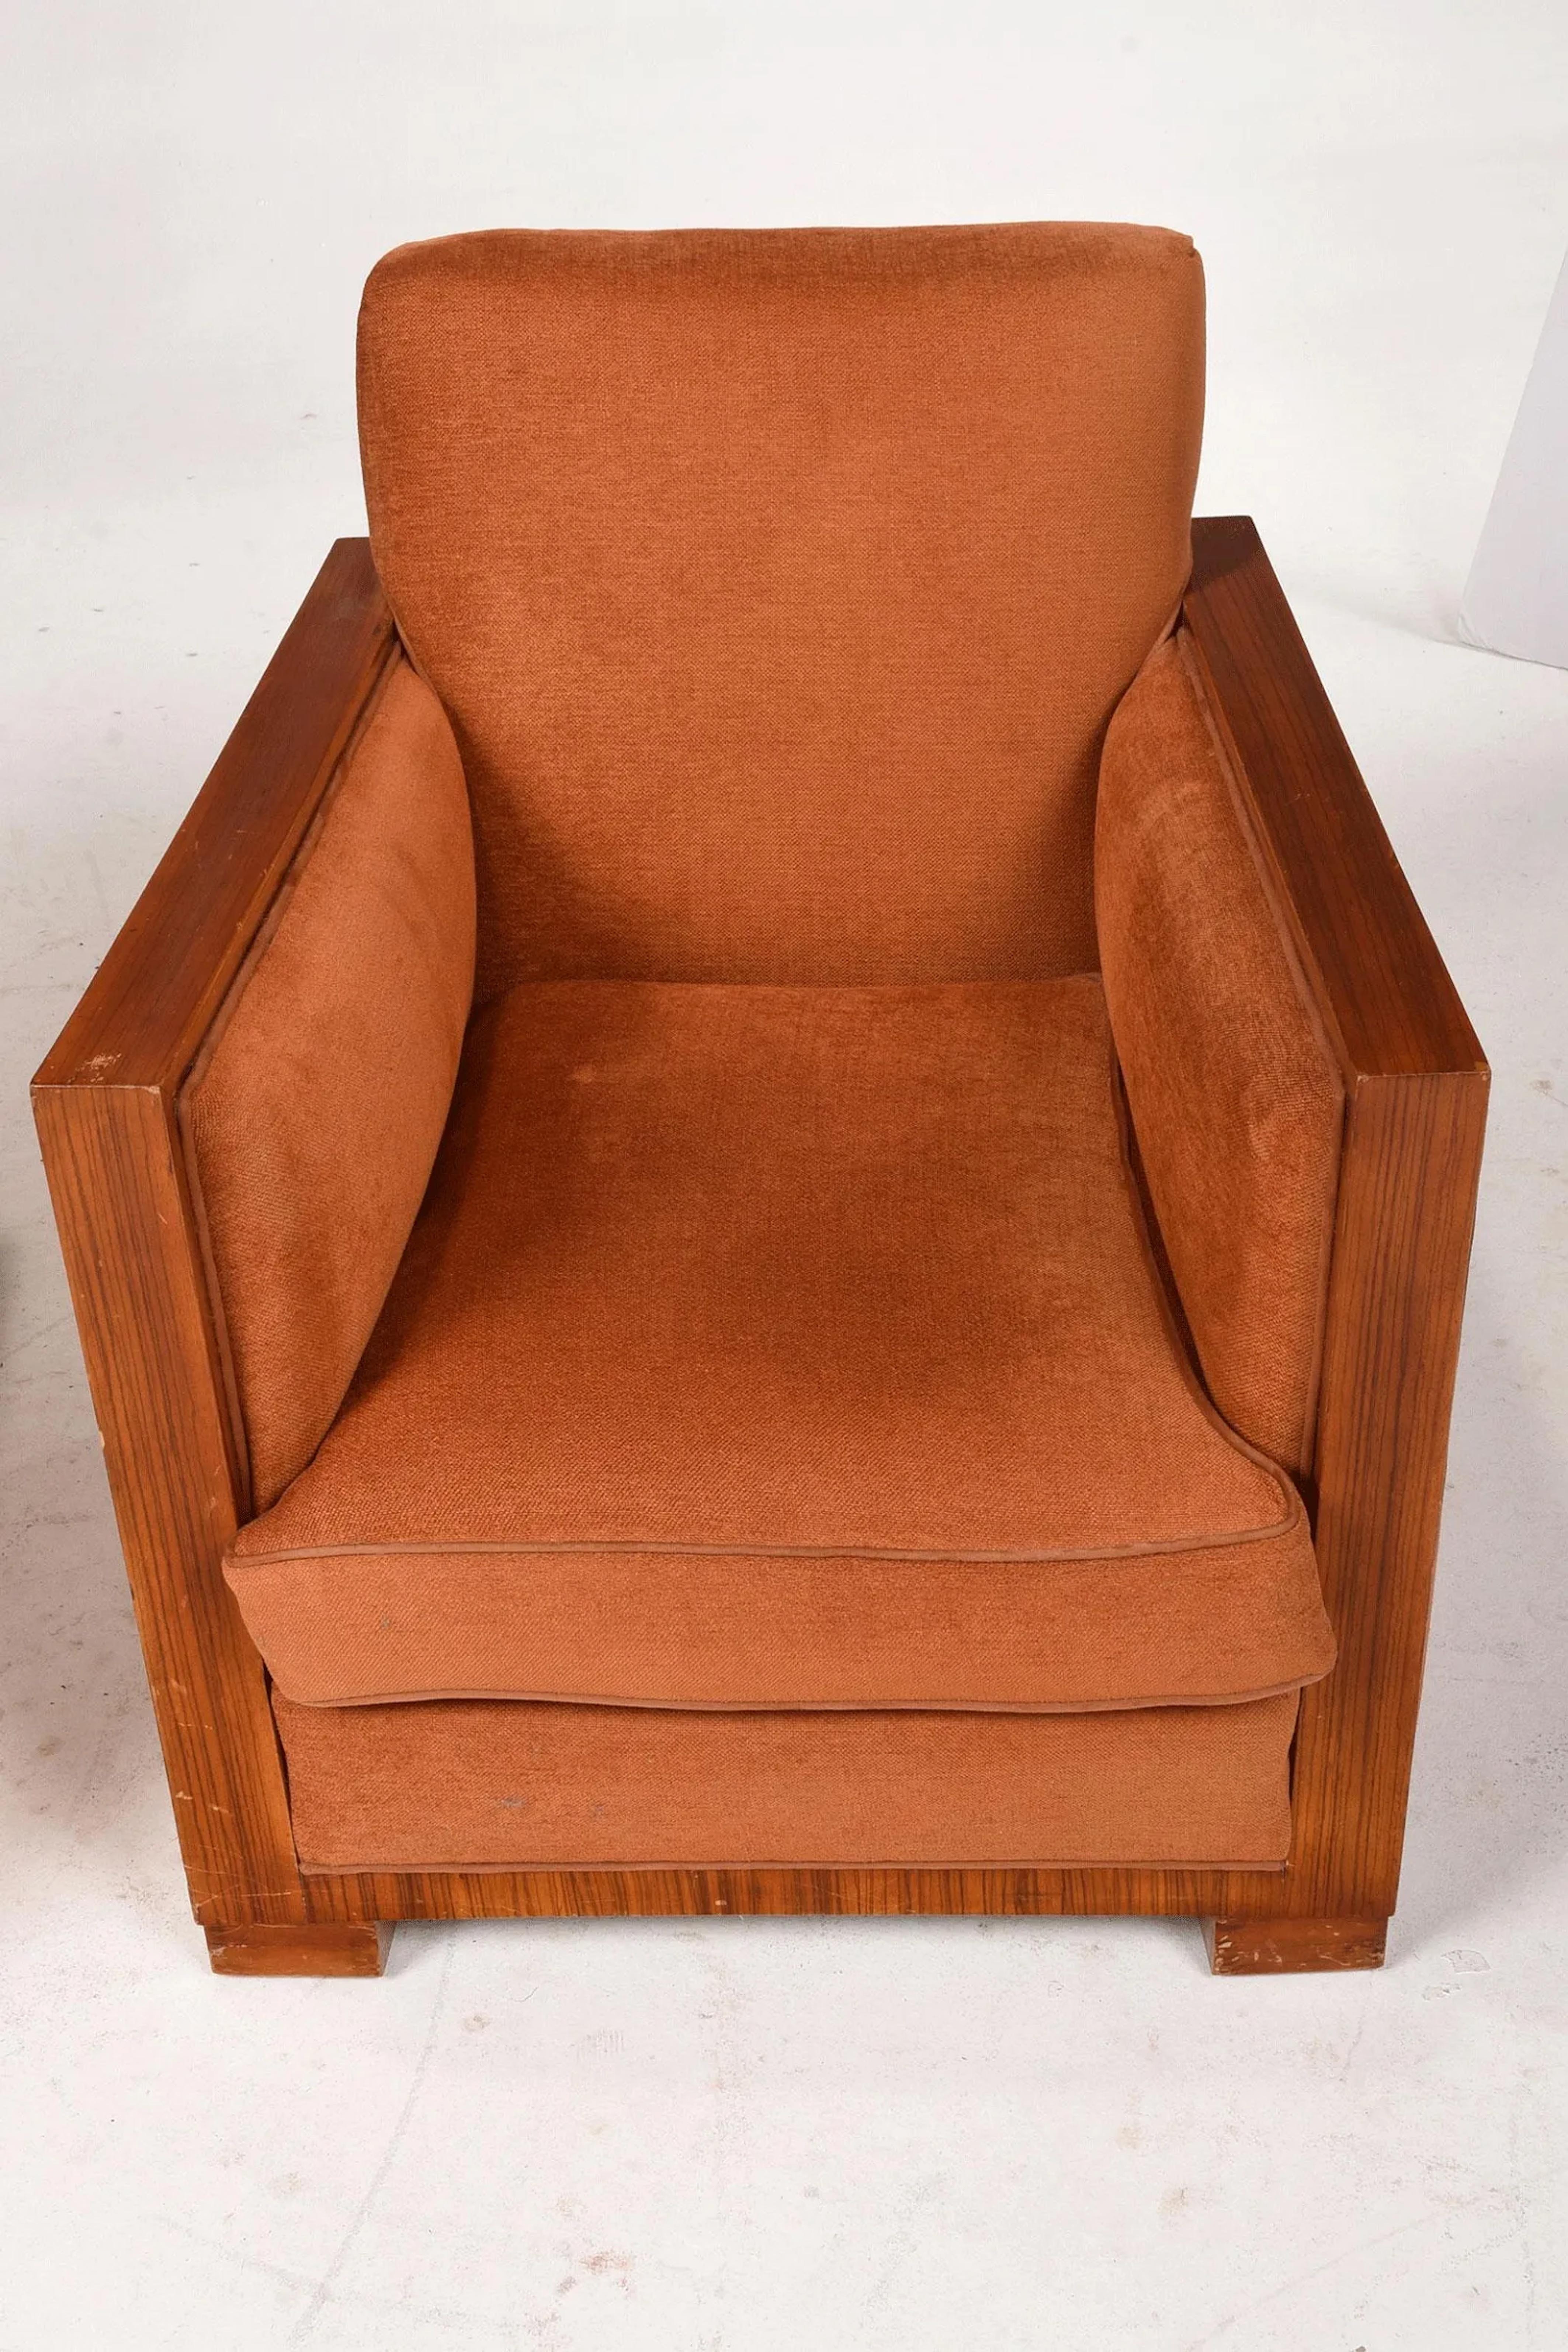 Pair French Art Deco Period, Rosewood, Armchairs  In Good Condition For Sale In Montreal, QC